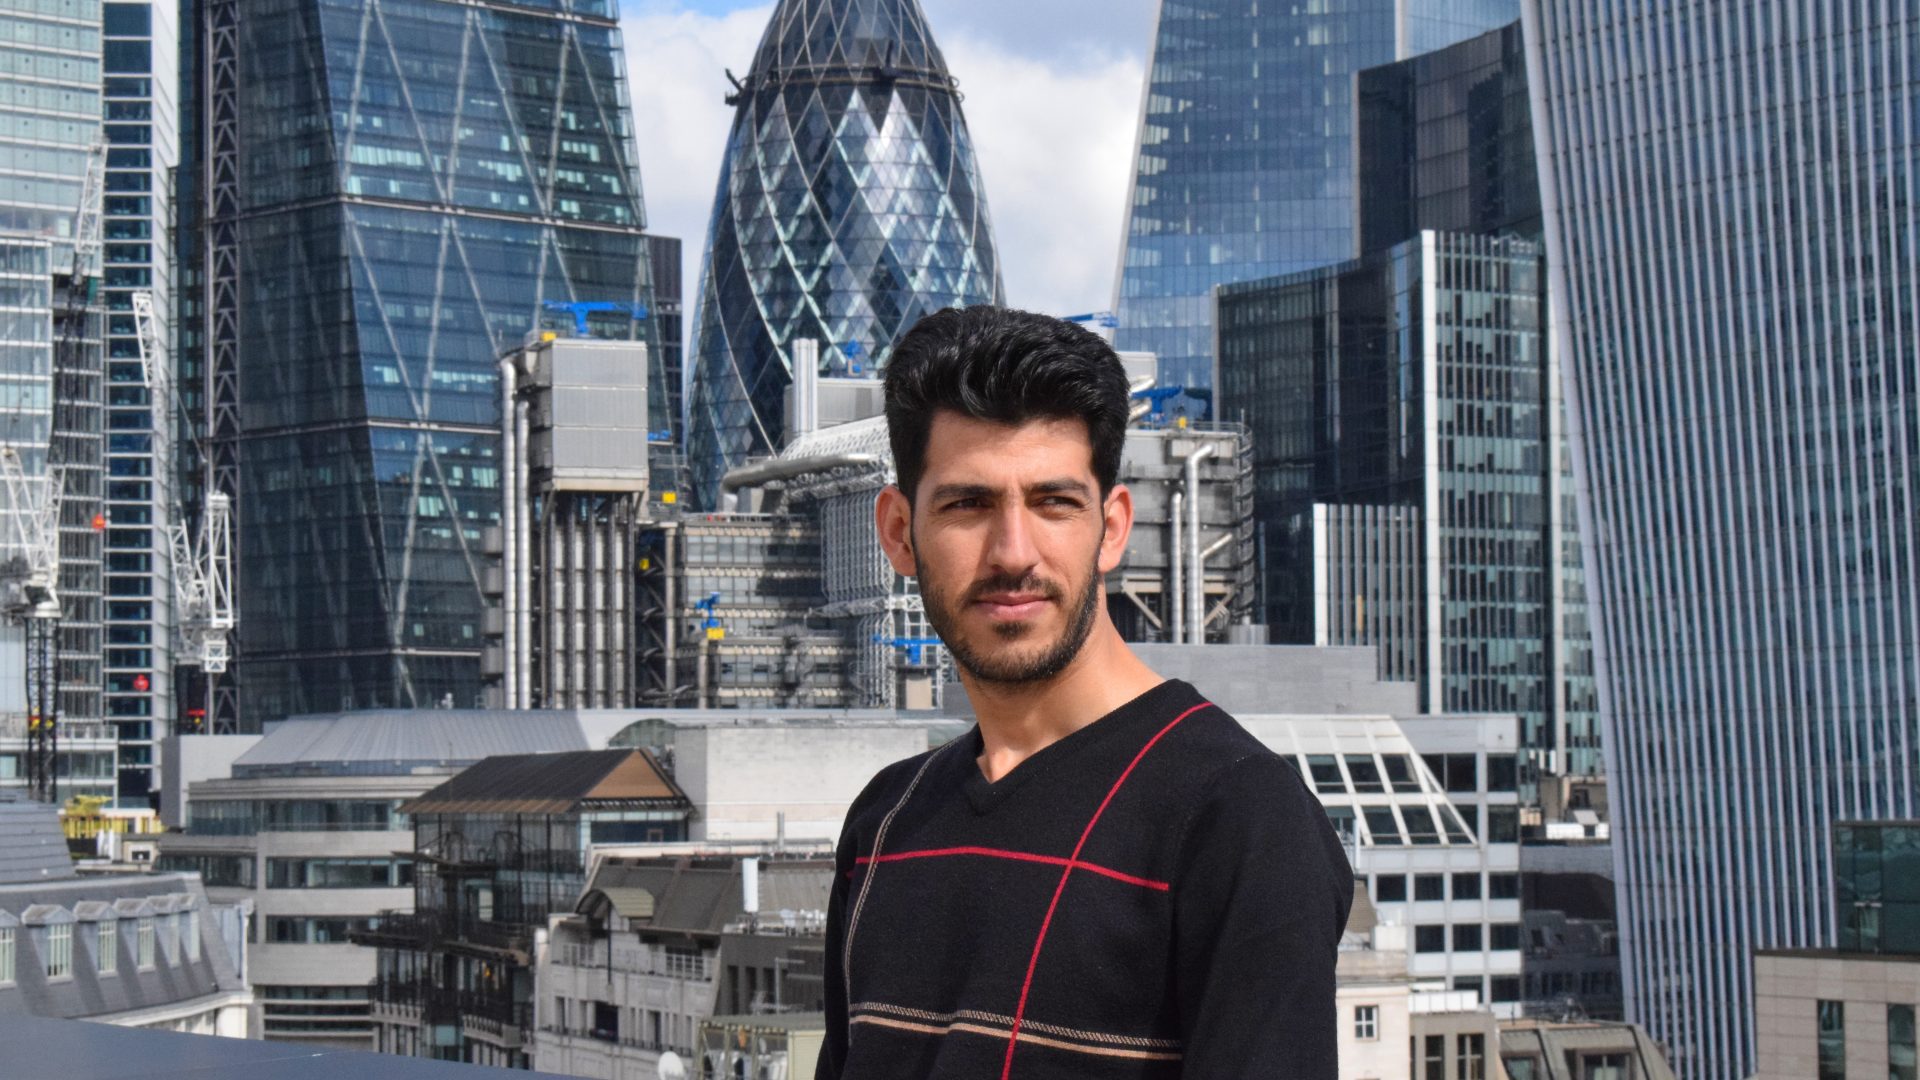 Young man in black jumper stood in front of City of London skyline